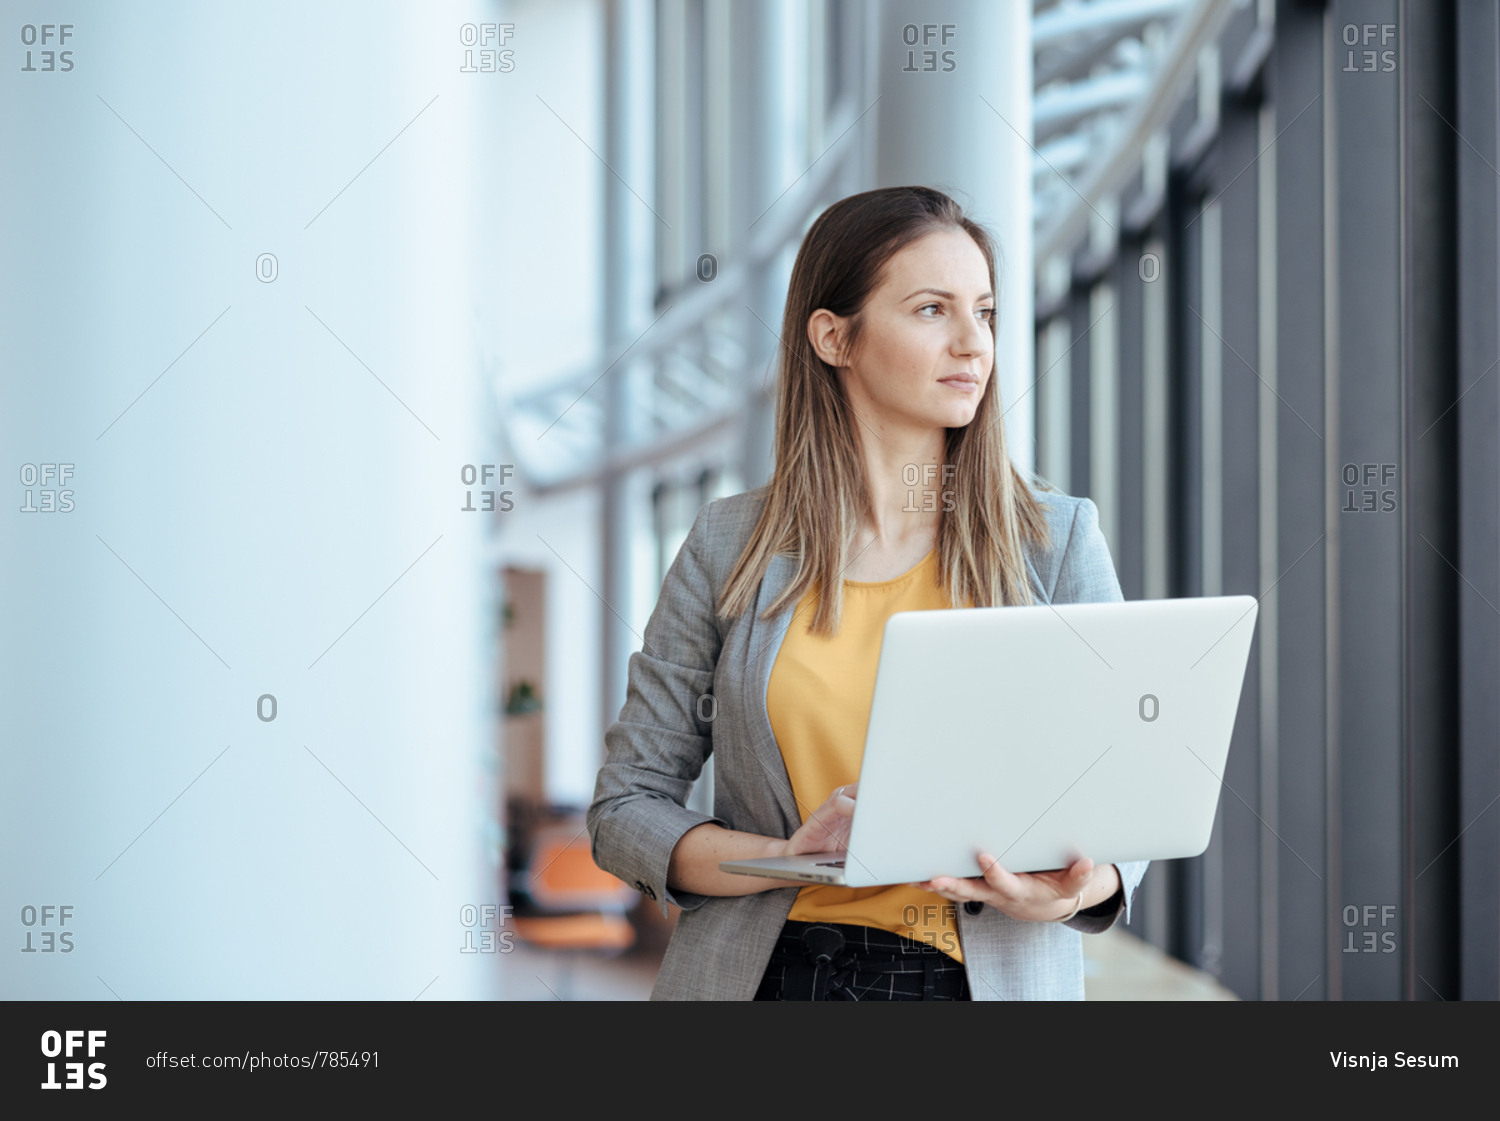 Business woman holding her computer